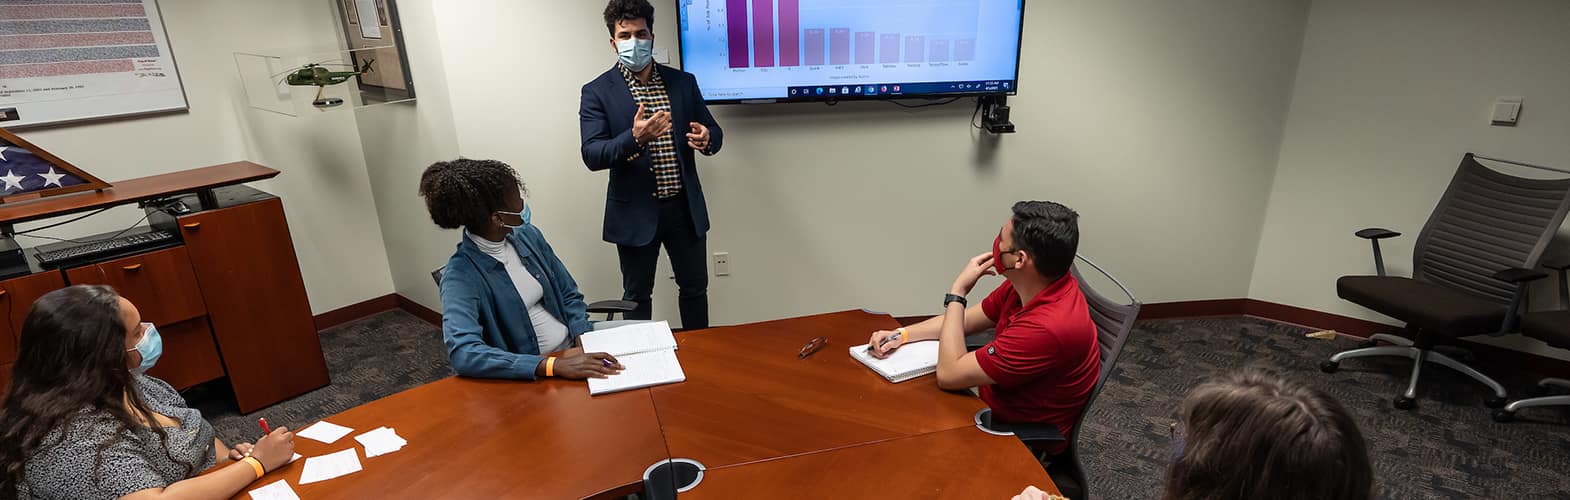 Dr. Seyed Ali Haji Esmaeili, Assistant Professor of Transportation, Logistics and Information Sciences in the David B. O'Maley College of Business, works with students to identify trends in data technology jobs. April 1, 2021. (Embry-Riddle/Daryl LaBello)